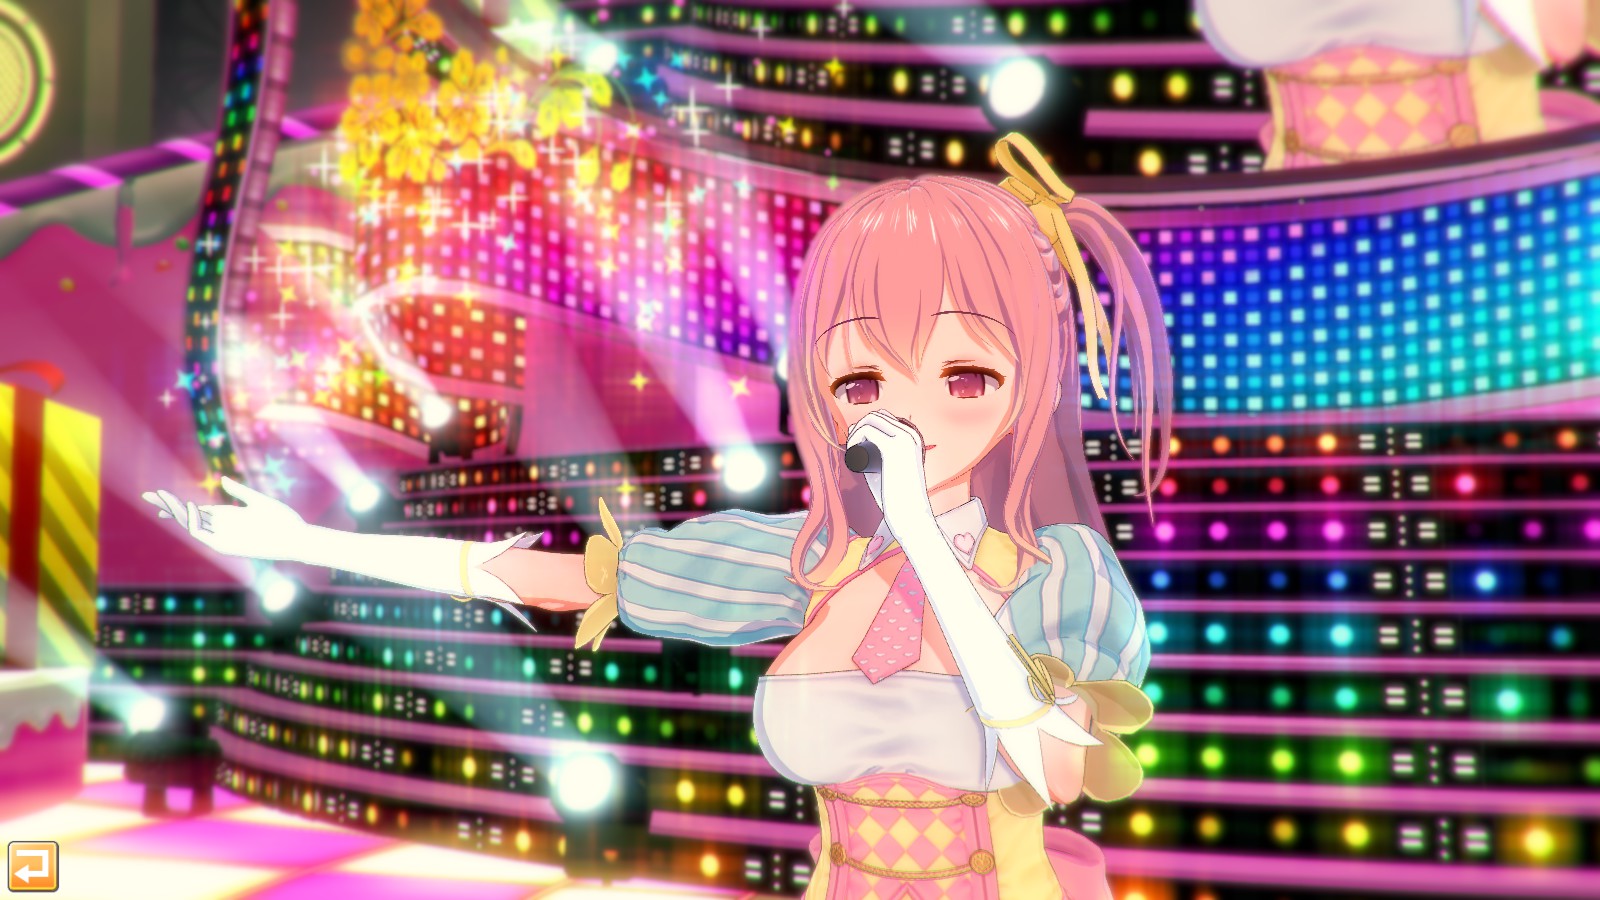 Save 20 On コイカツ！ Koikatsu Party On Steam